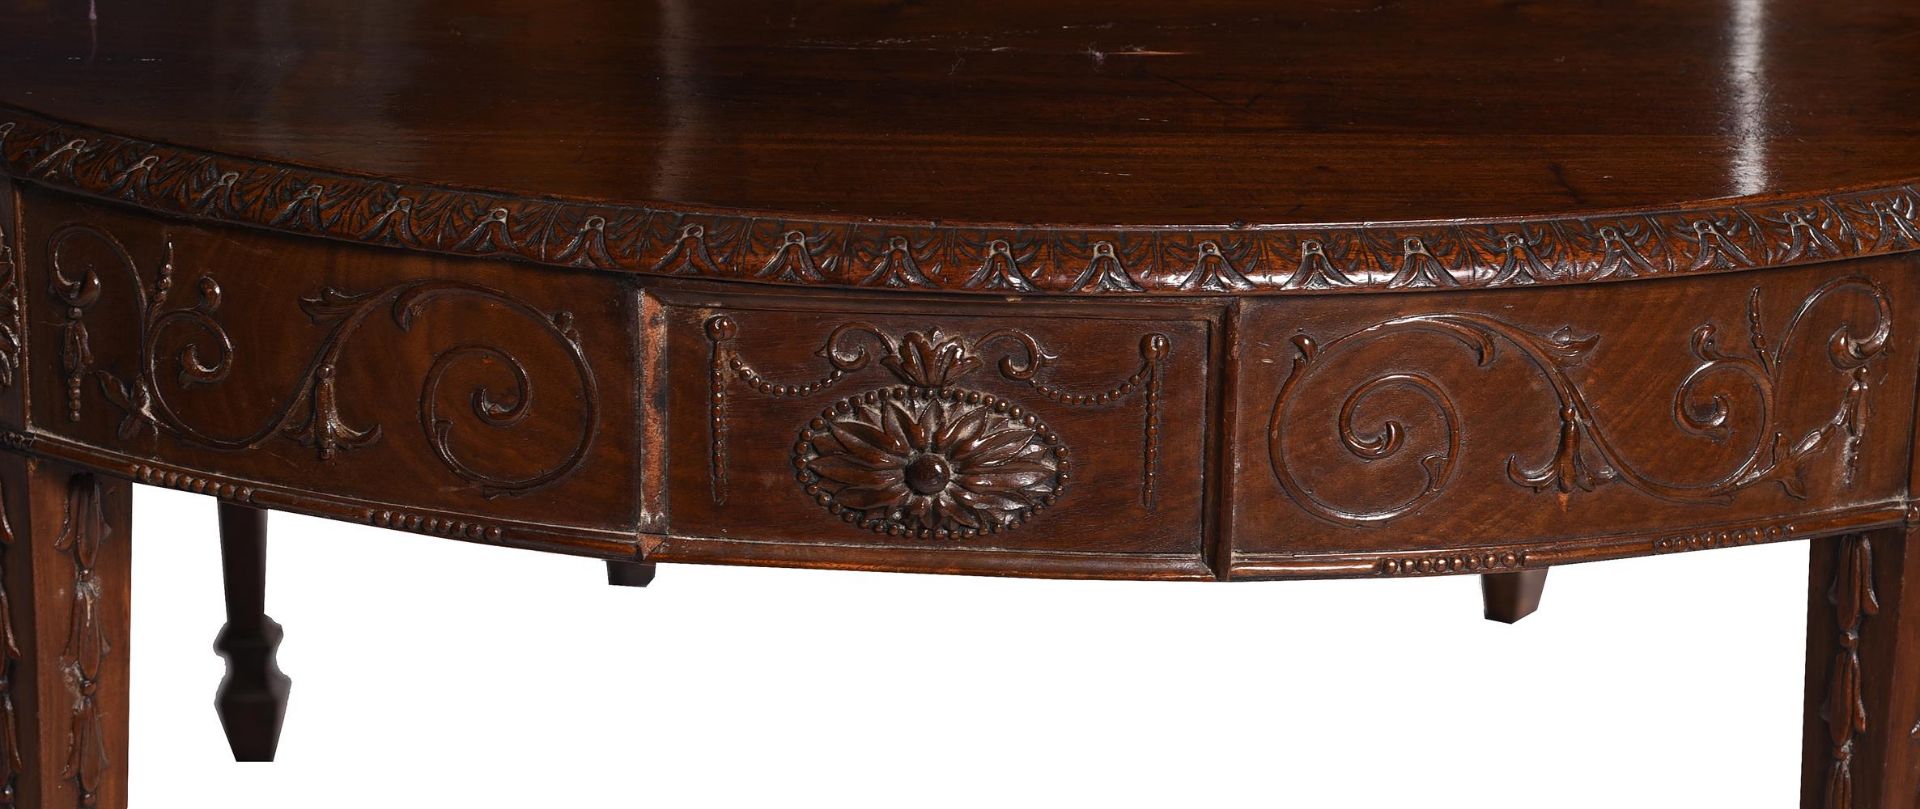 A MAHOGANY D END DINING TABLE IN GEORGE III ADAM STYLE - Image 3 of 4